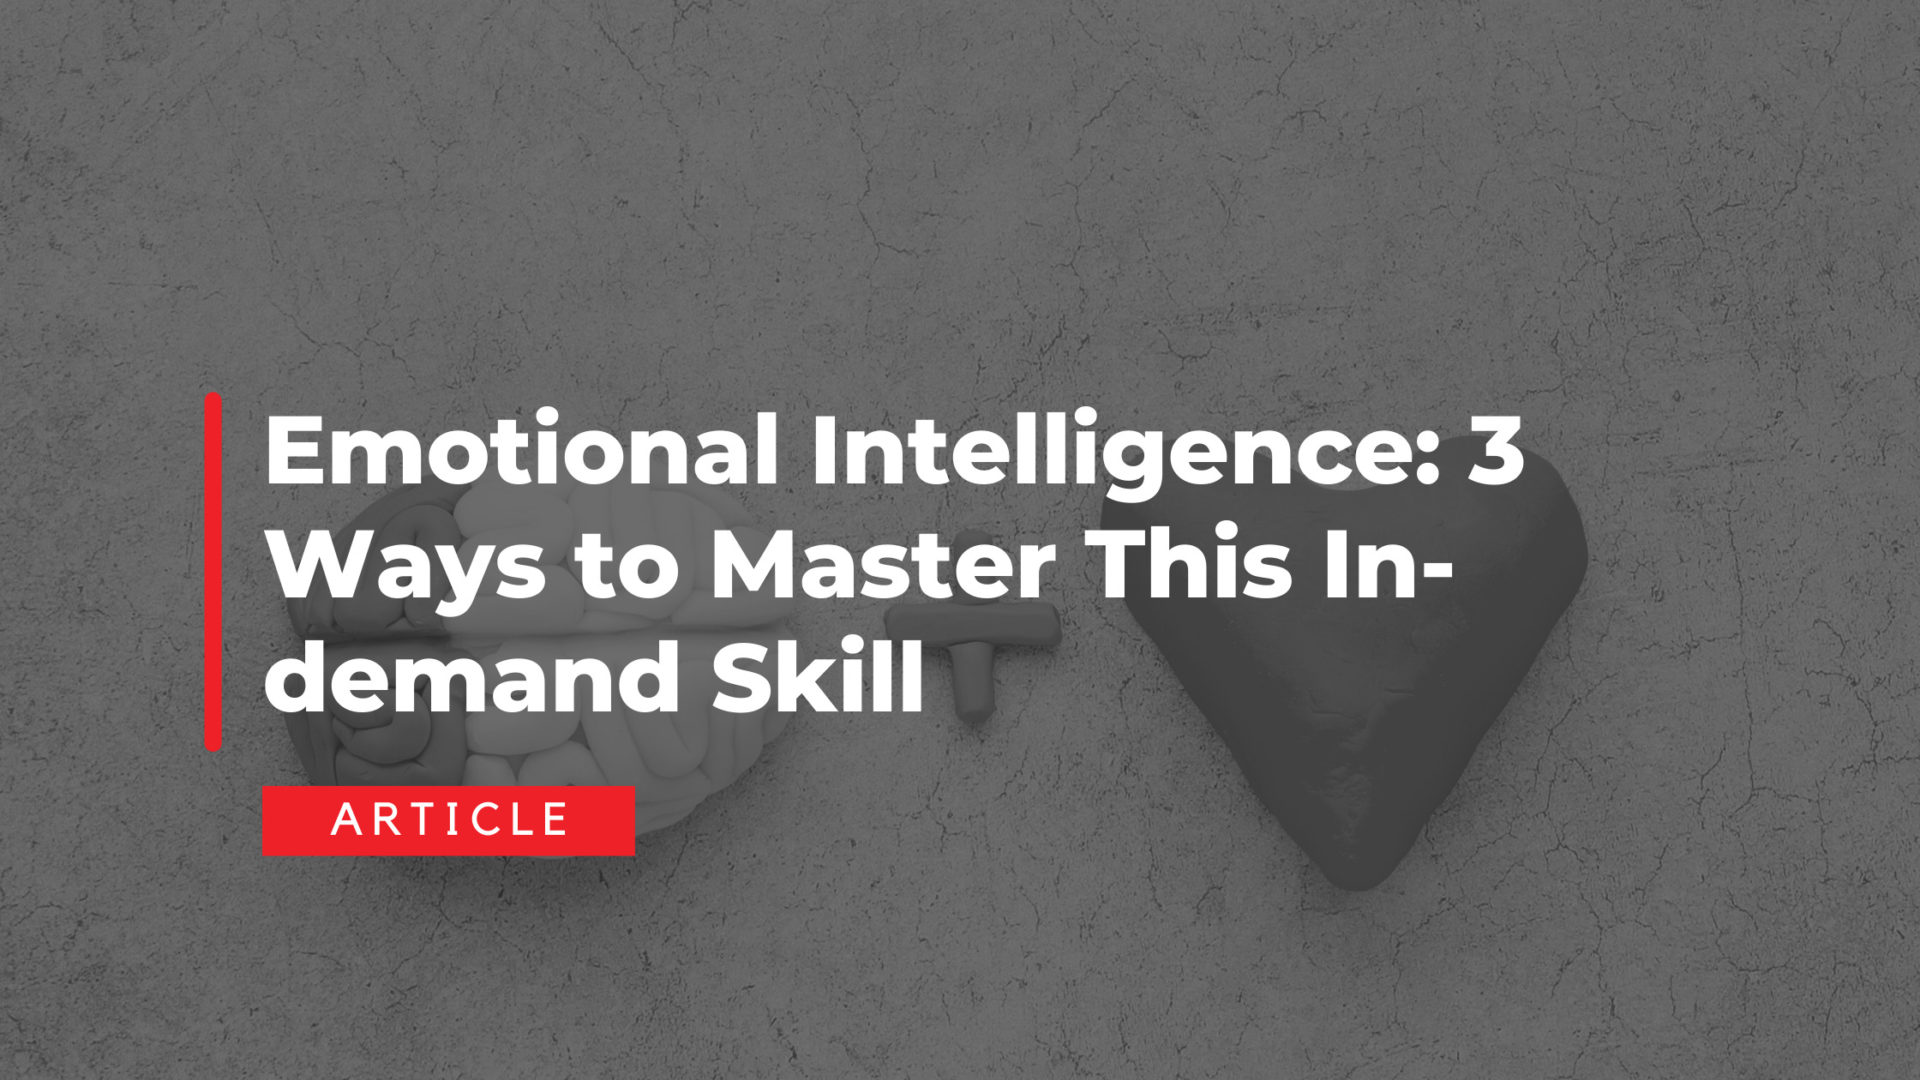 Emotional Intelligence: 3 Ways to Master this In-Demand Skill